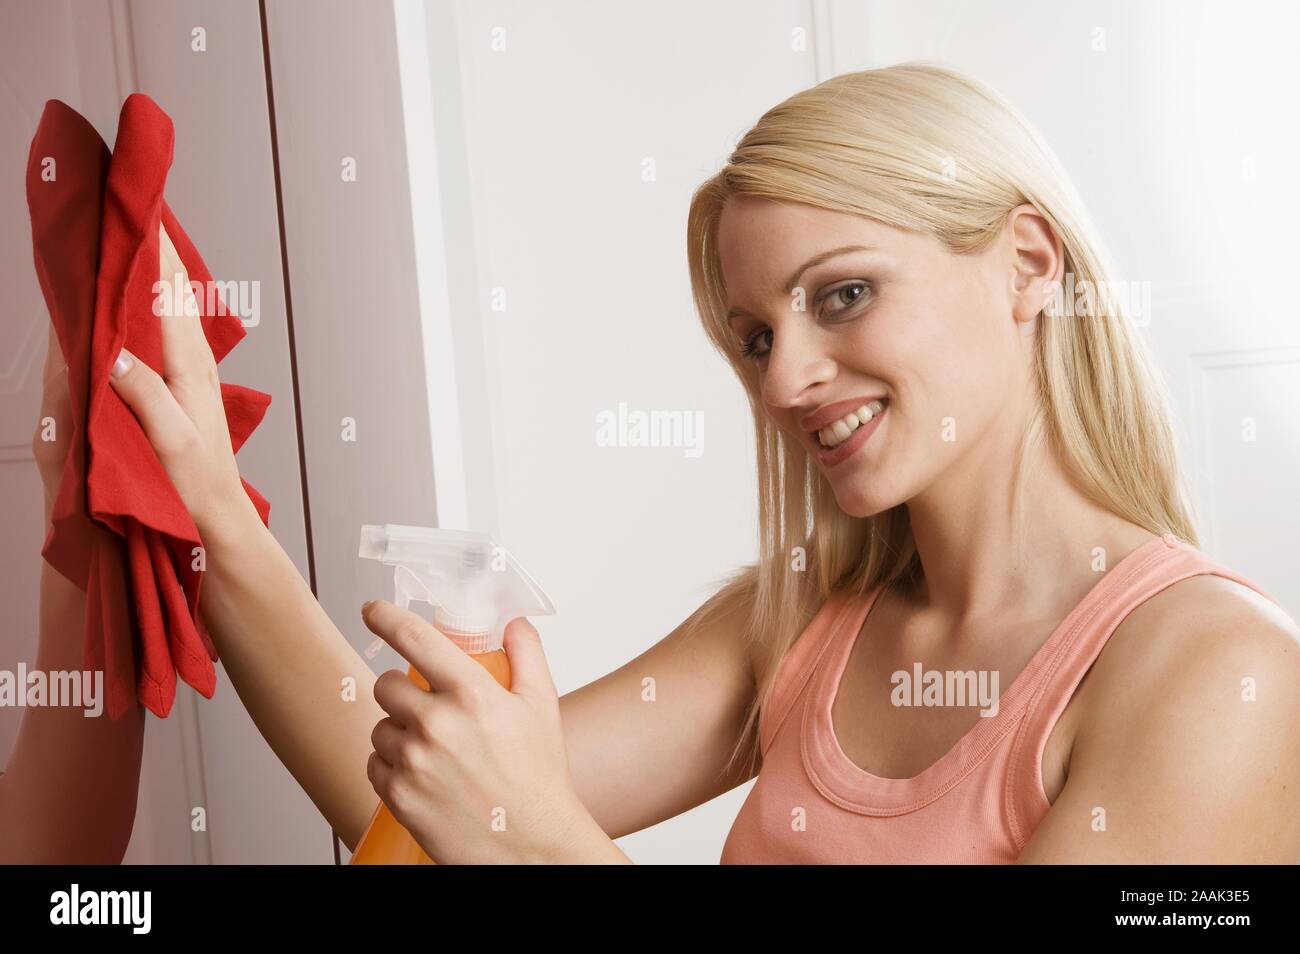 Junge Frau bei der Hausarbeit - Young Woman doing Housework Stock Photo